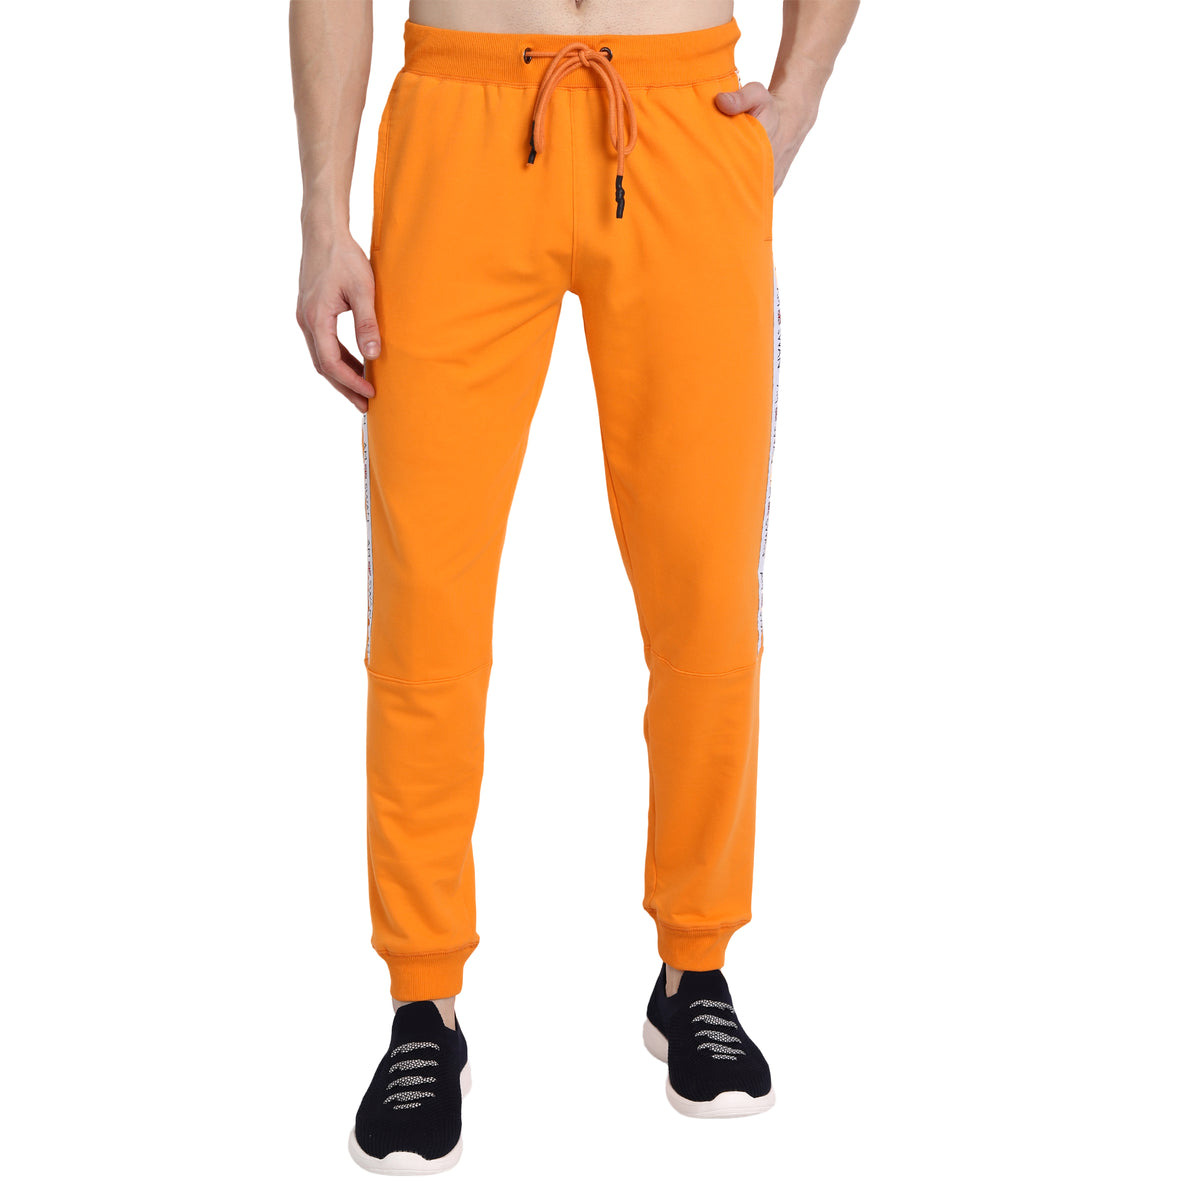 MENS COTTON RICH LYCRA WITH PRINTED TAPE TRACK PANTS